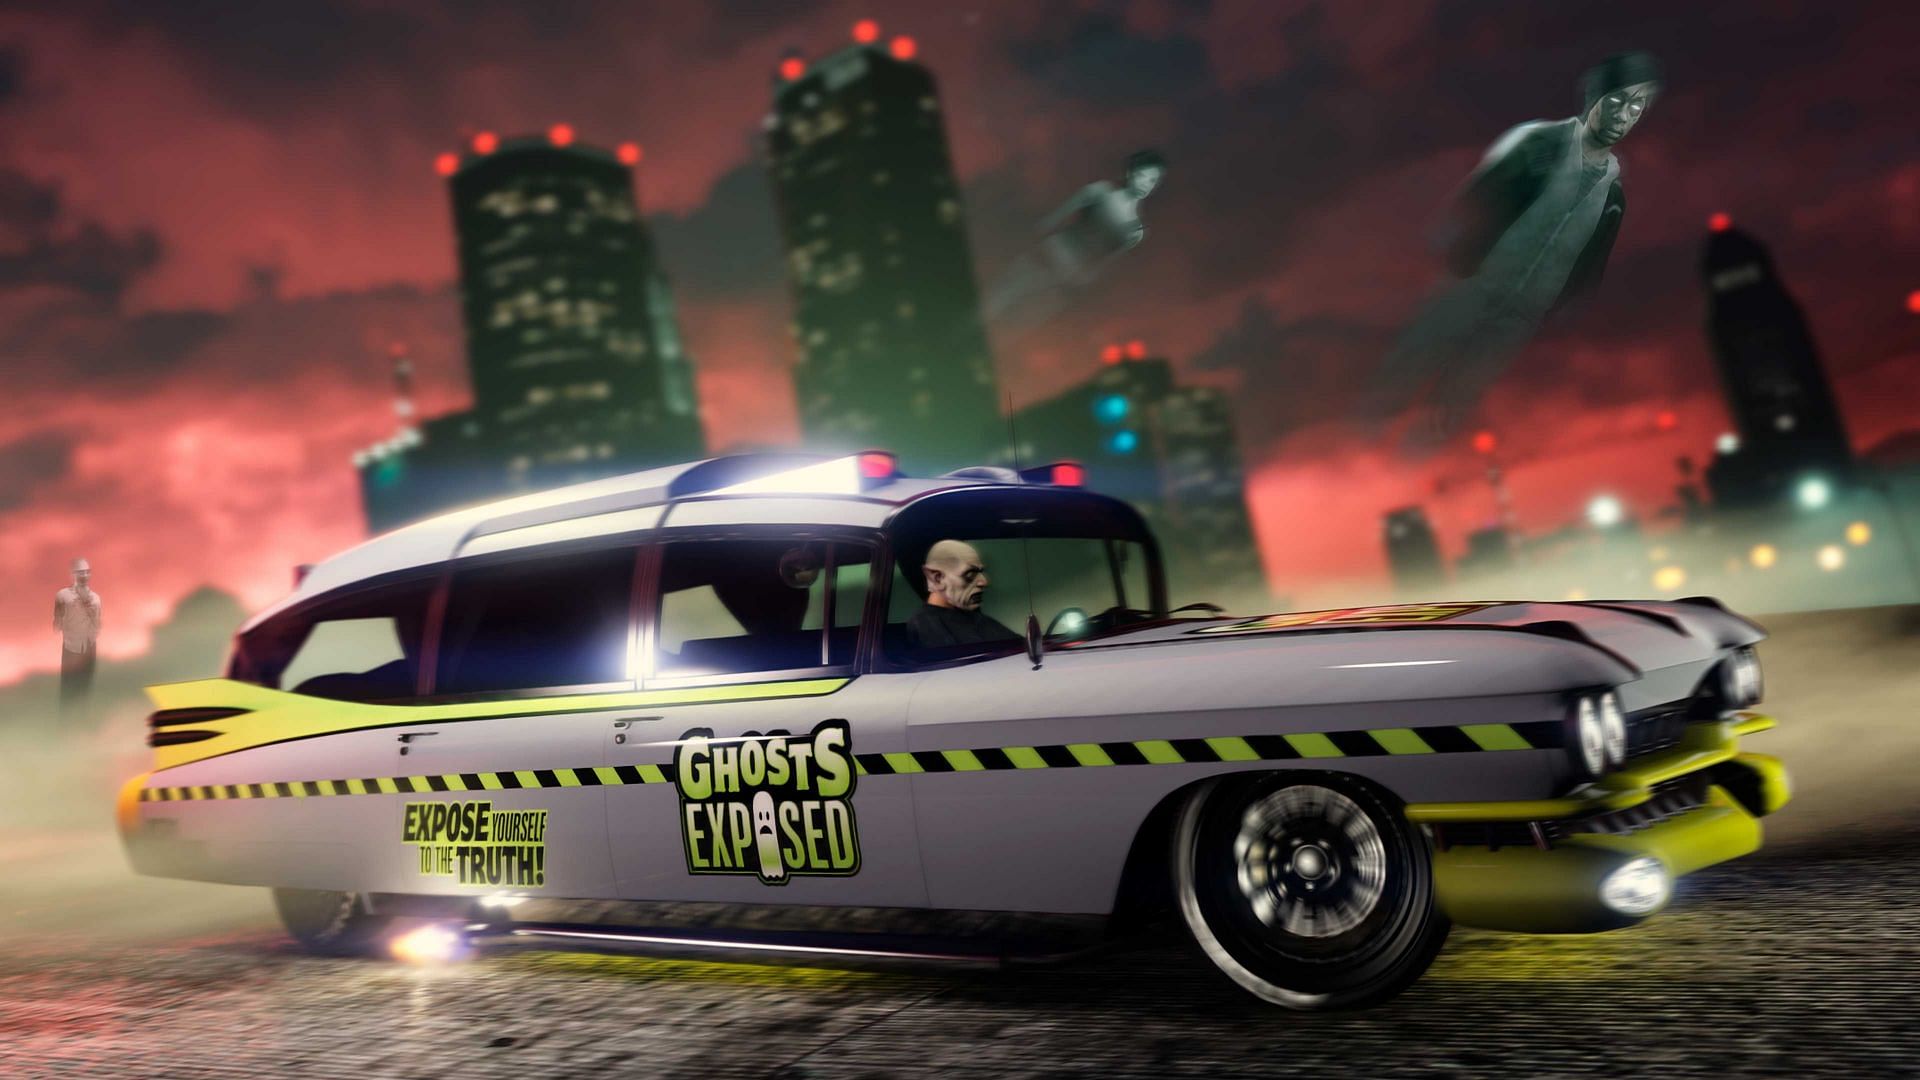 The Albany Brigham with the Ghosts Exposed livery (Image via Rockstar Games)